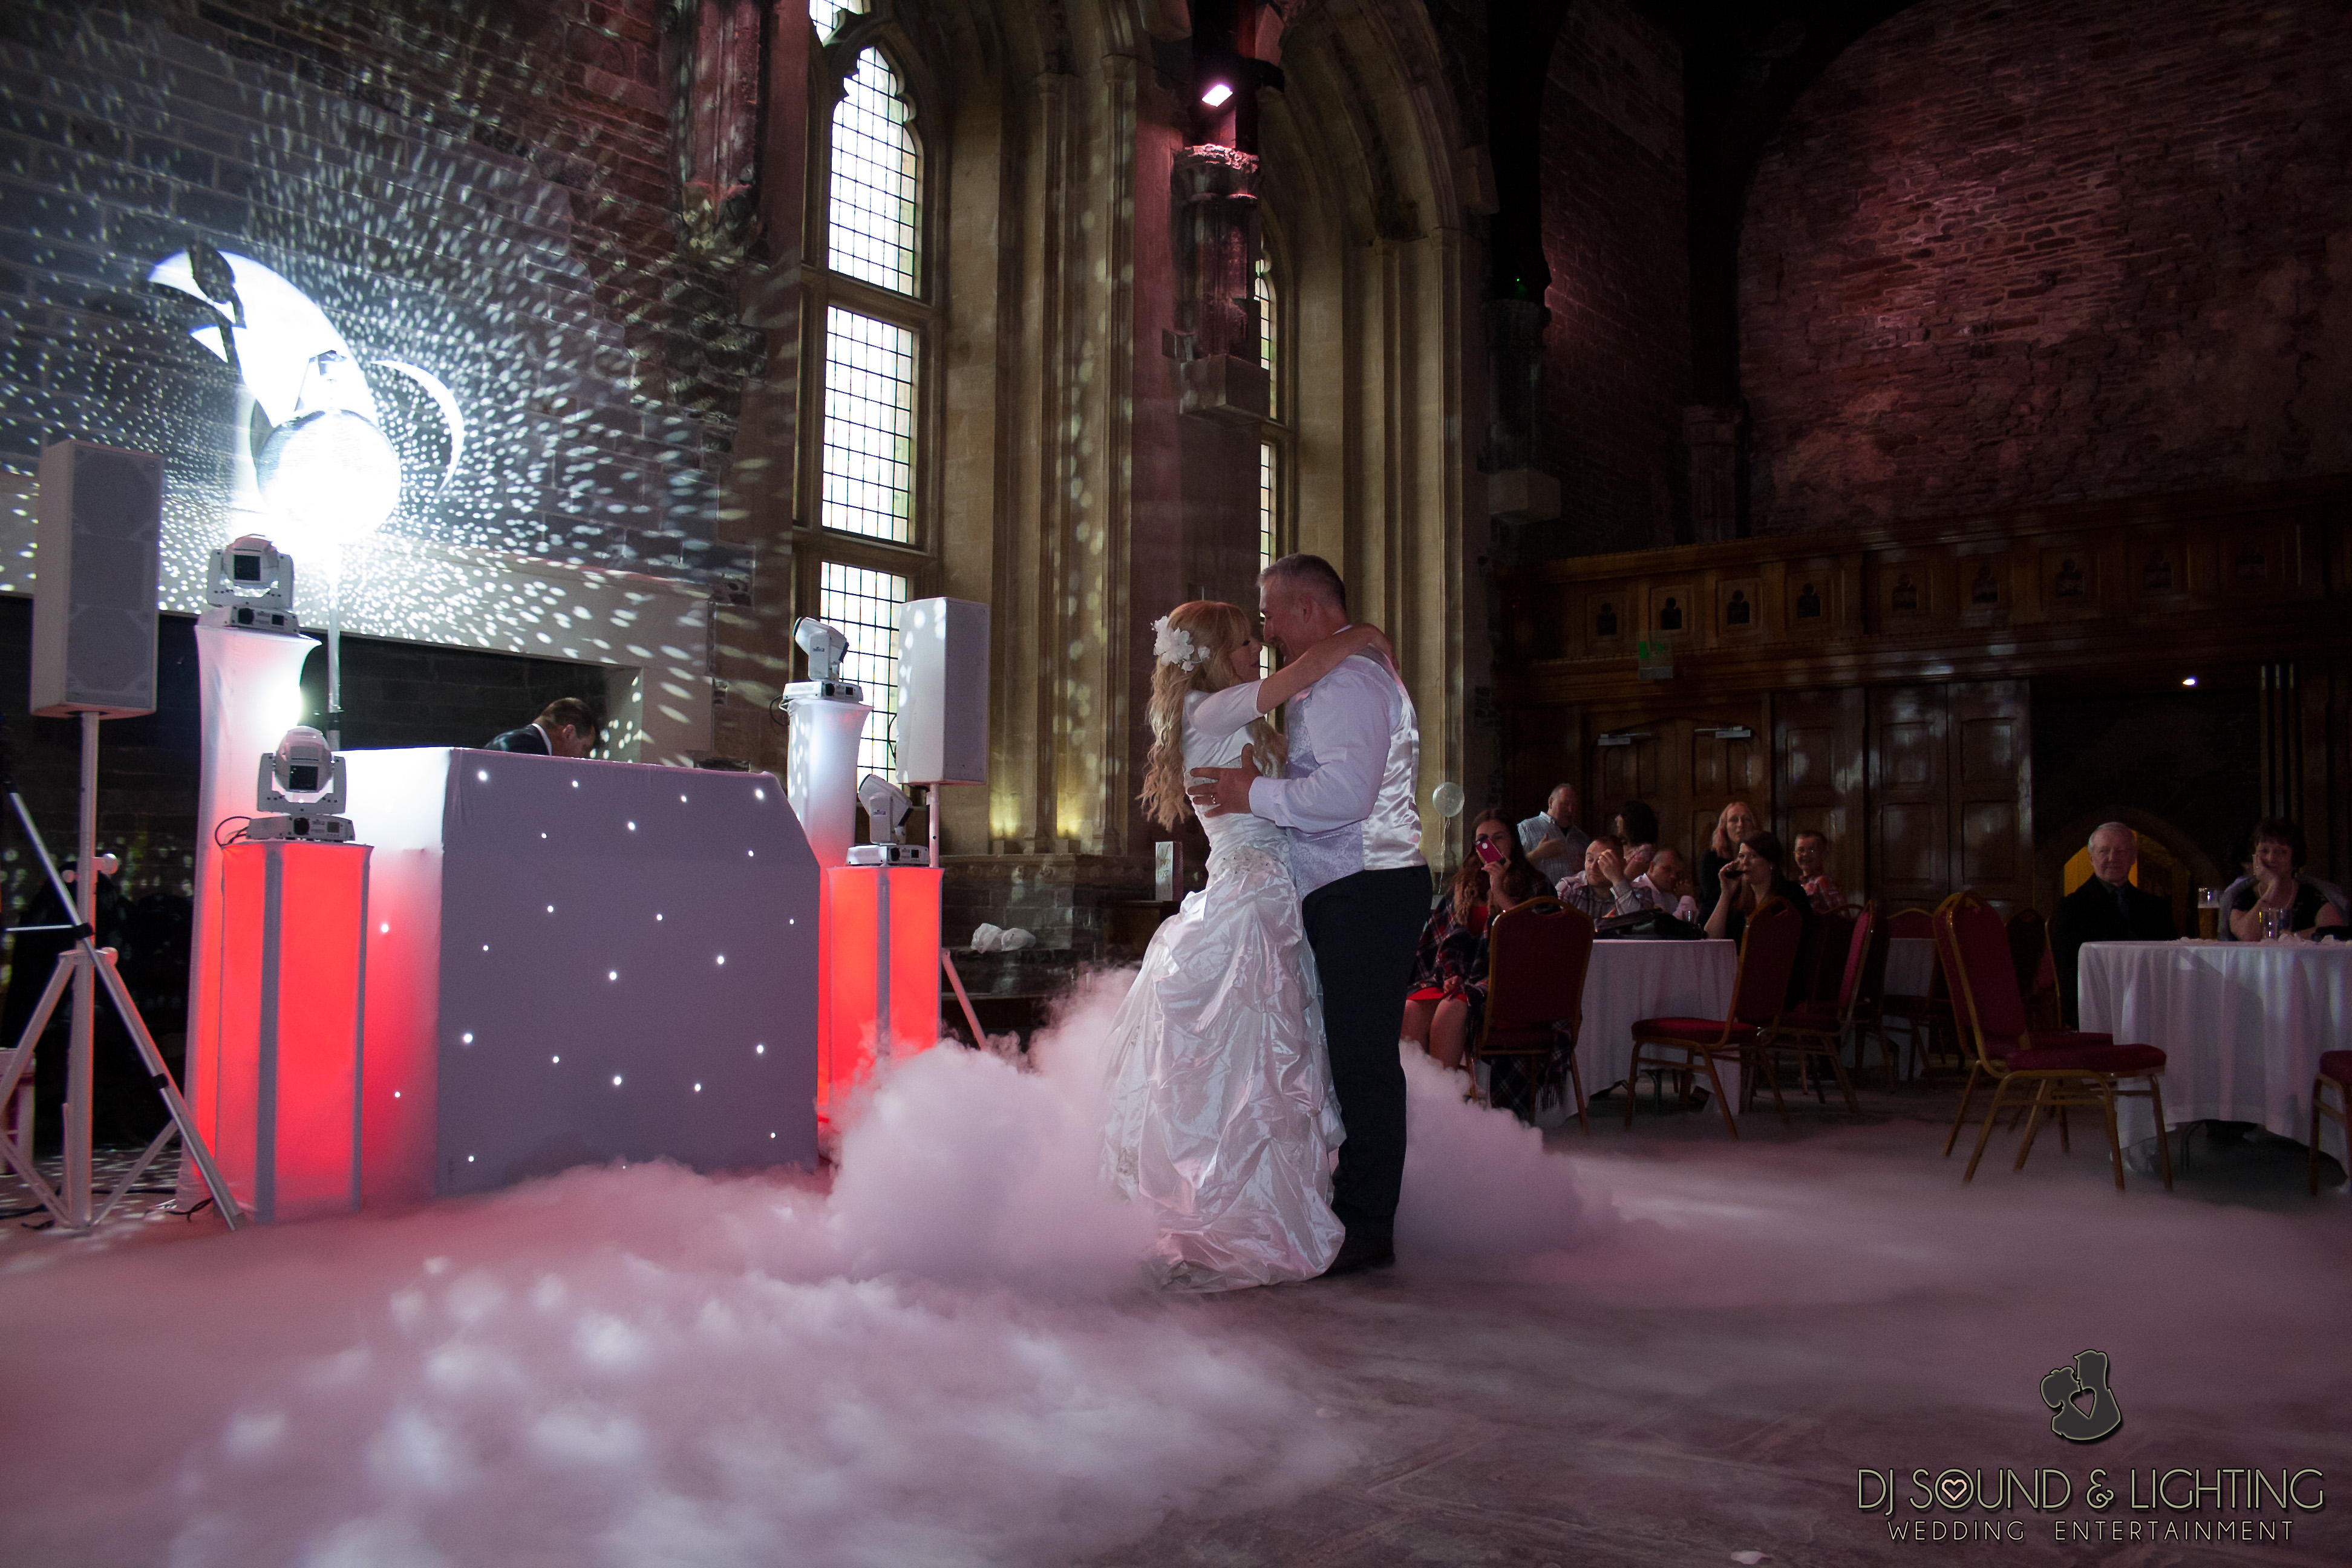 Weddin Dj at Caerphilly Castle.  A top nights wedding entertainment and music by DJ Sound & Lighting